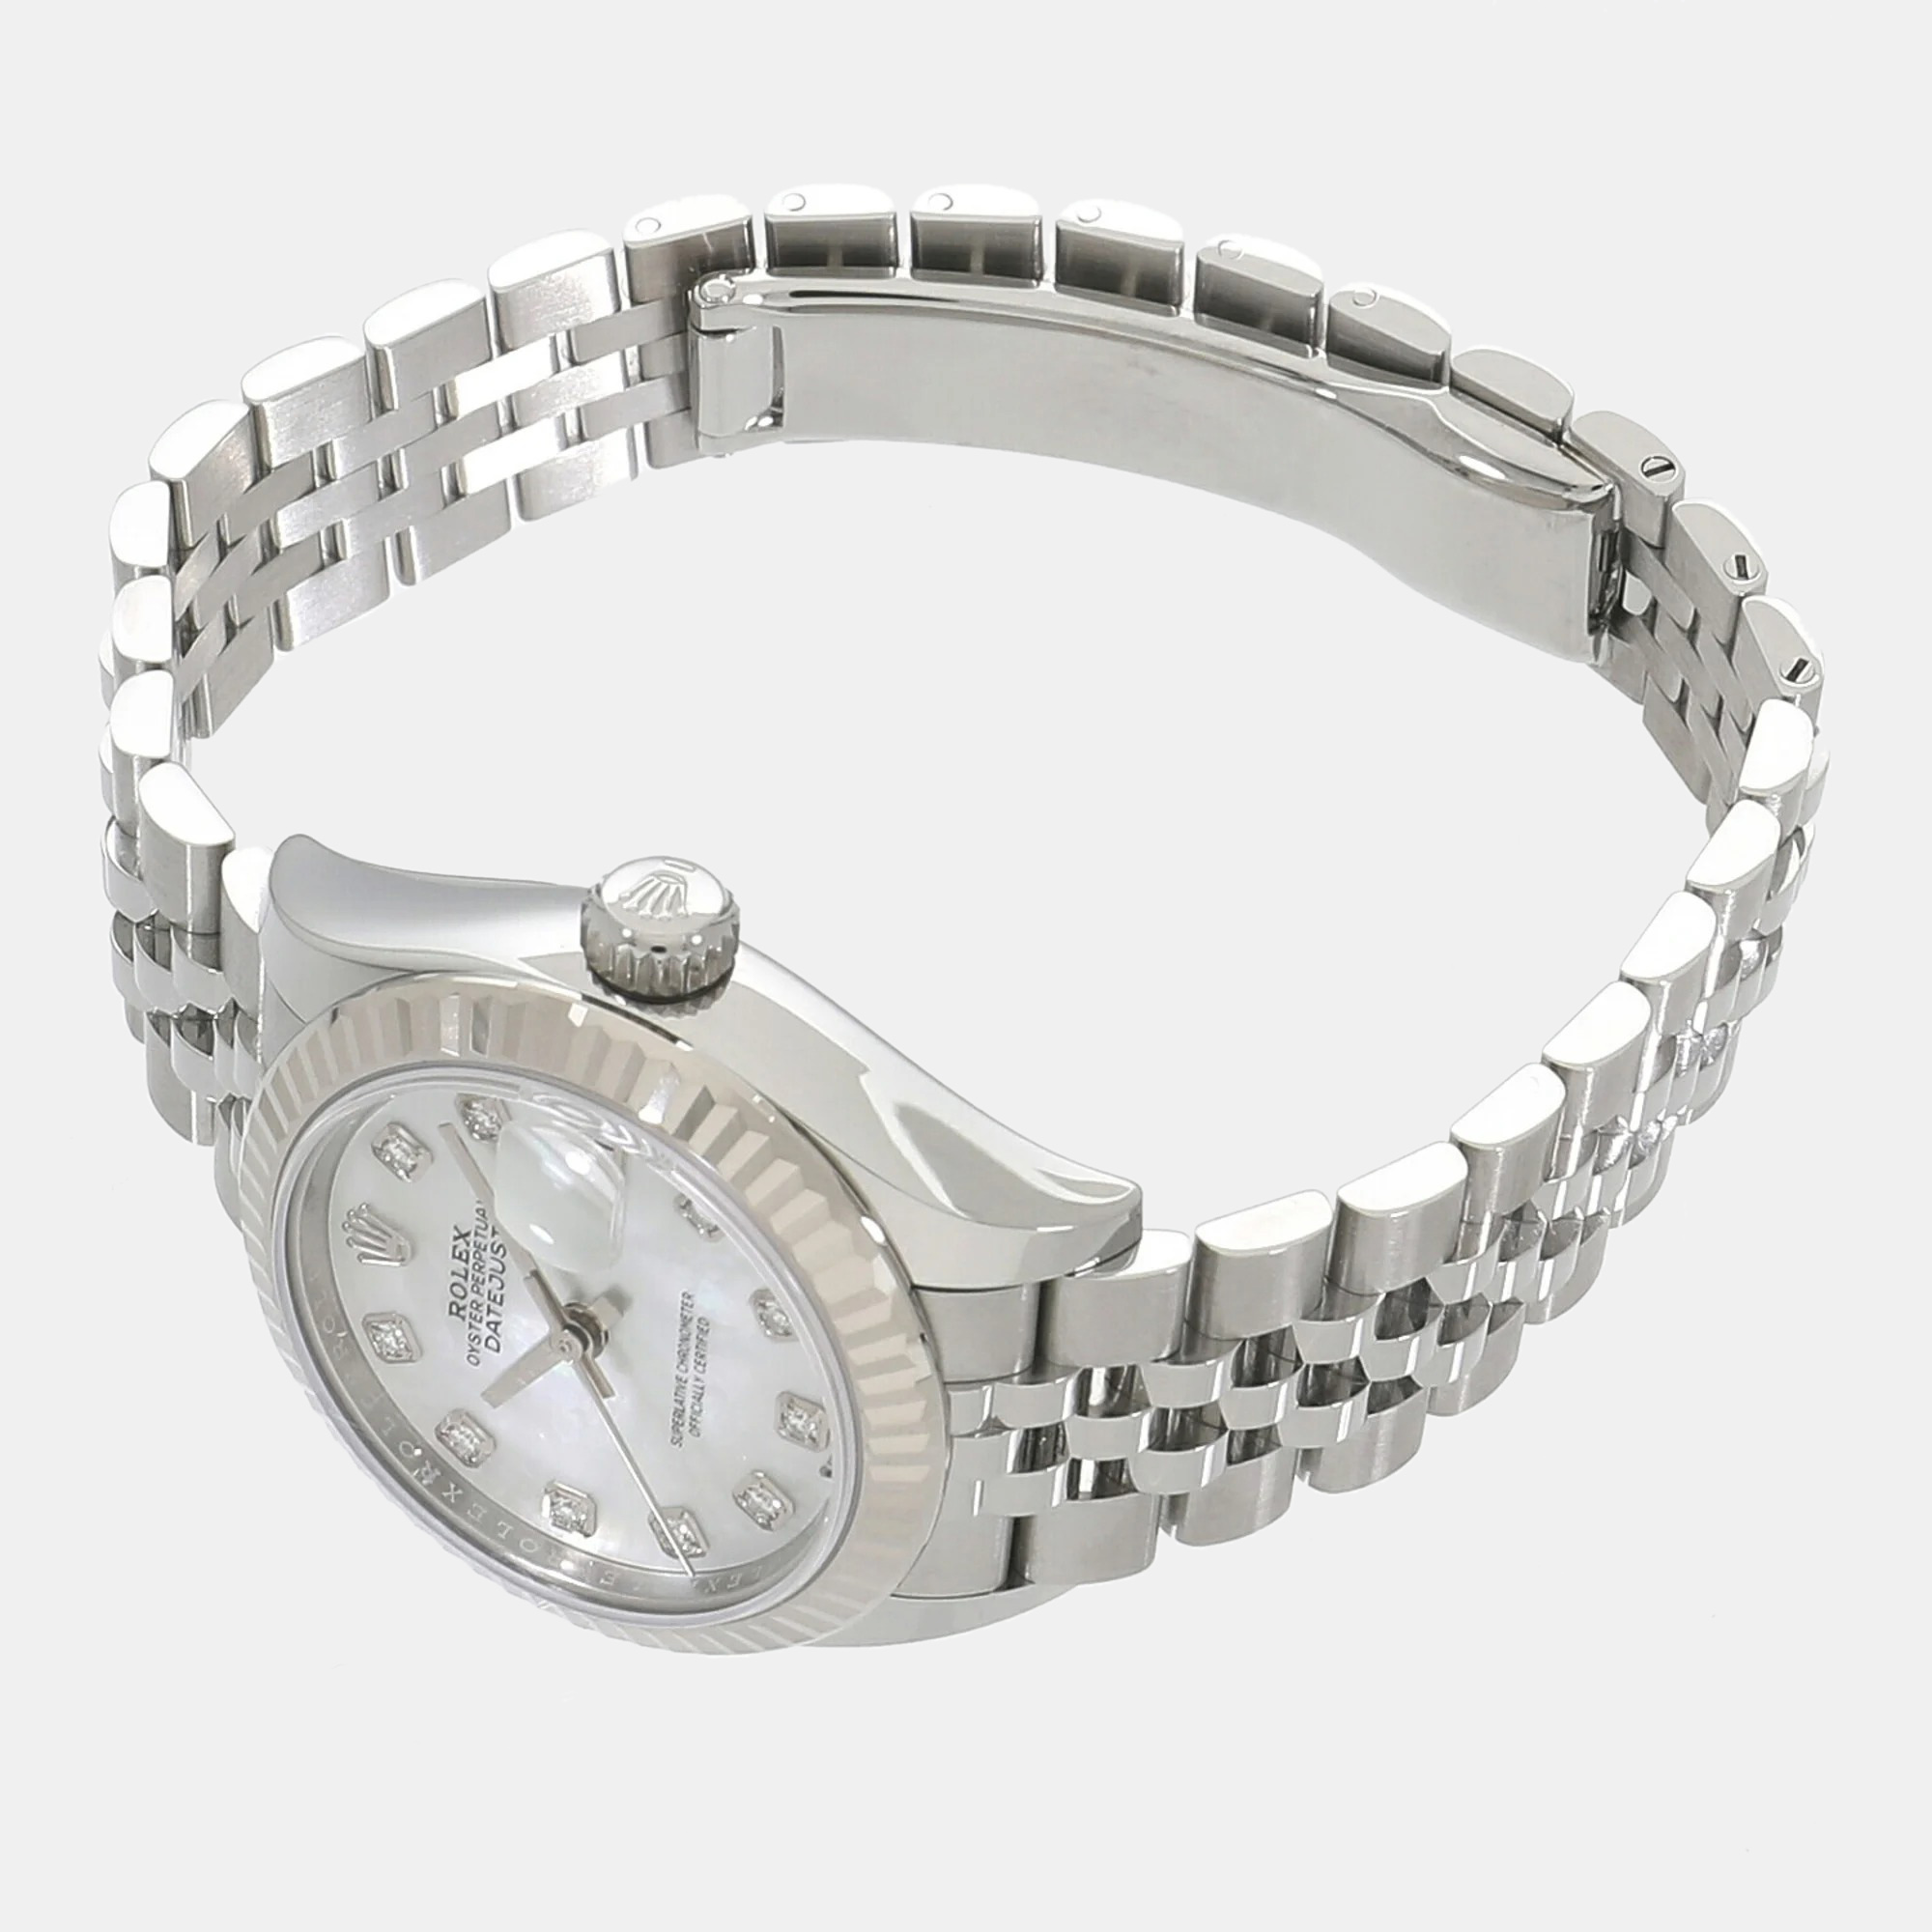 Rolex White Shell Diamond 18k White Gold And Stainless Steel Datejust 279174 Automatic Women's Wristwatch 28 Mm